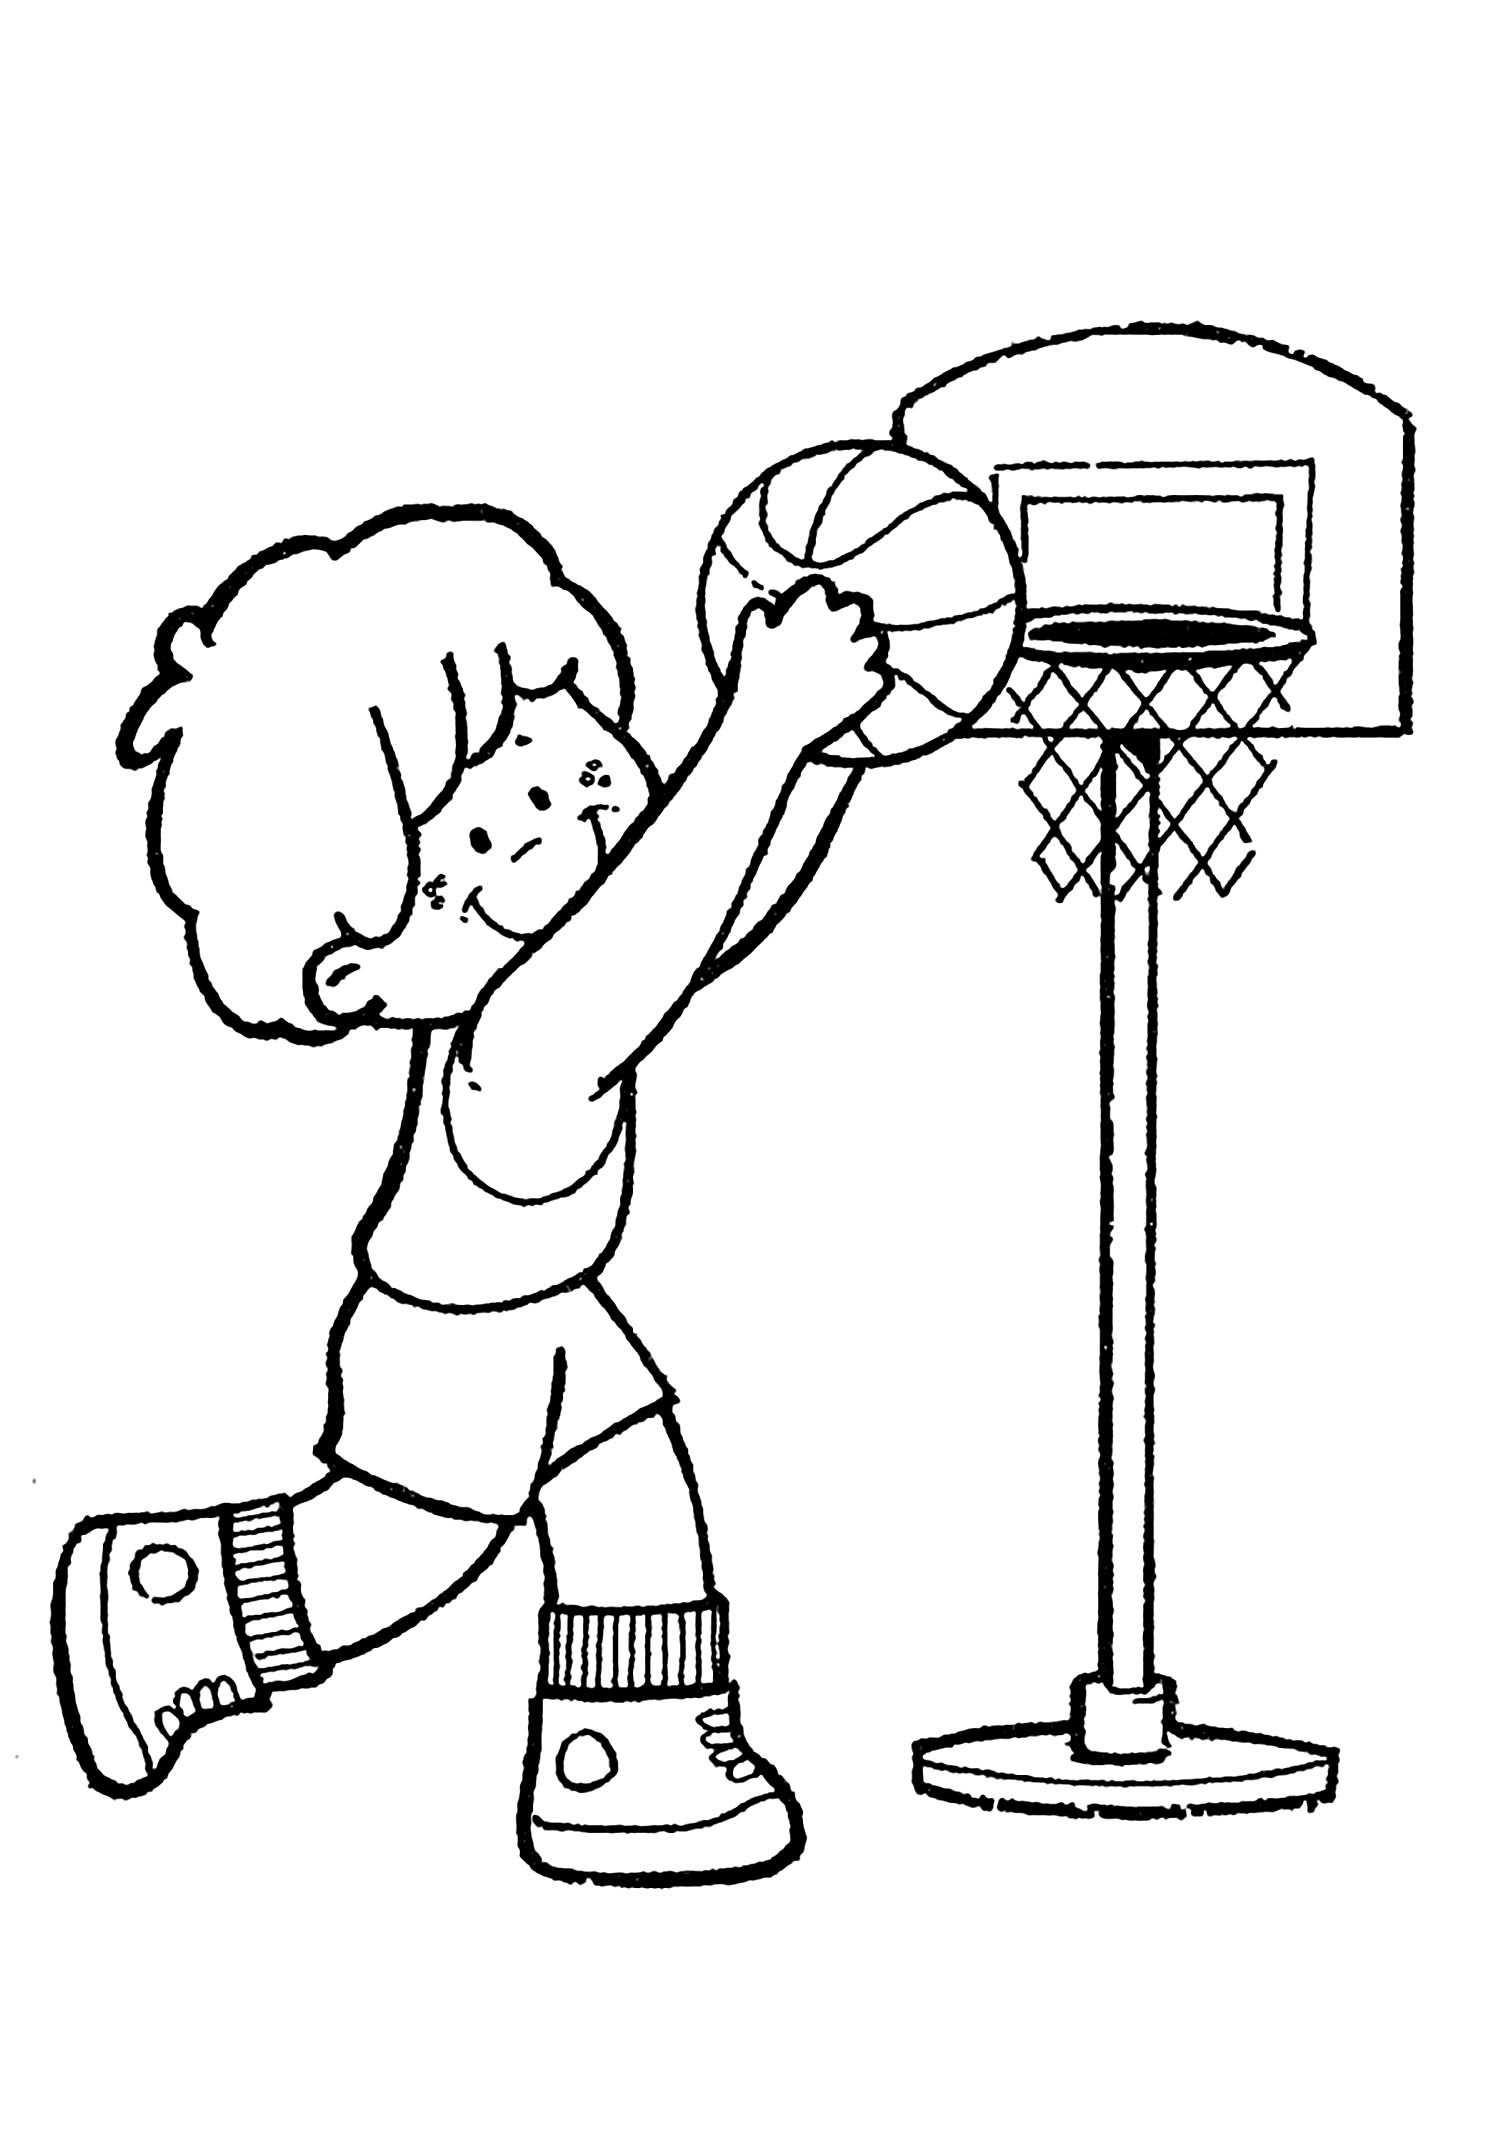 Printable basketball coloring pages for kids - Basketball Kids Coloring  Pages